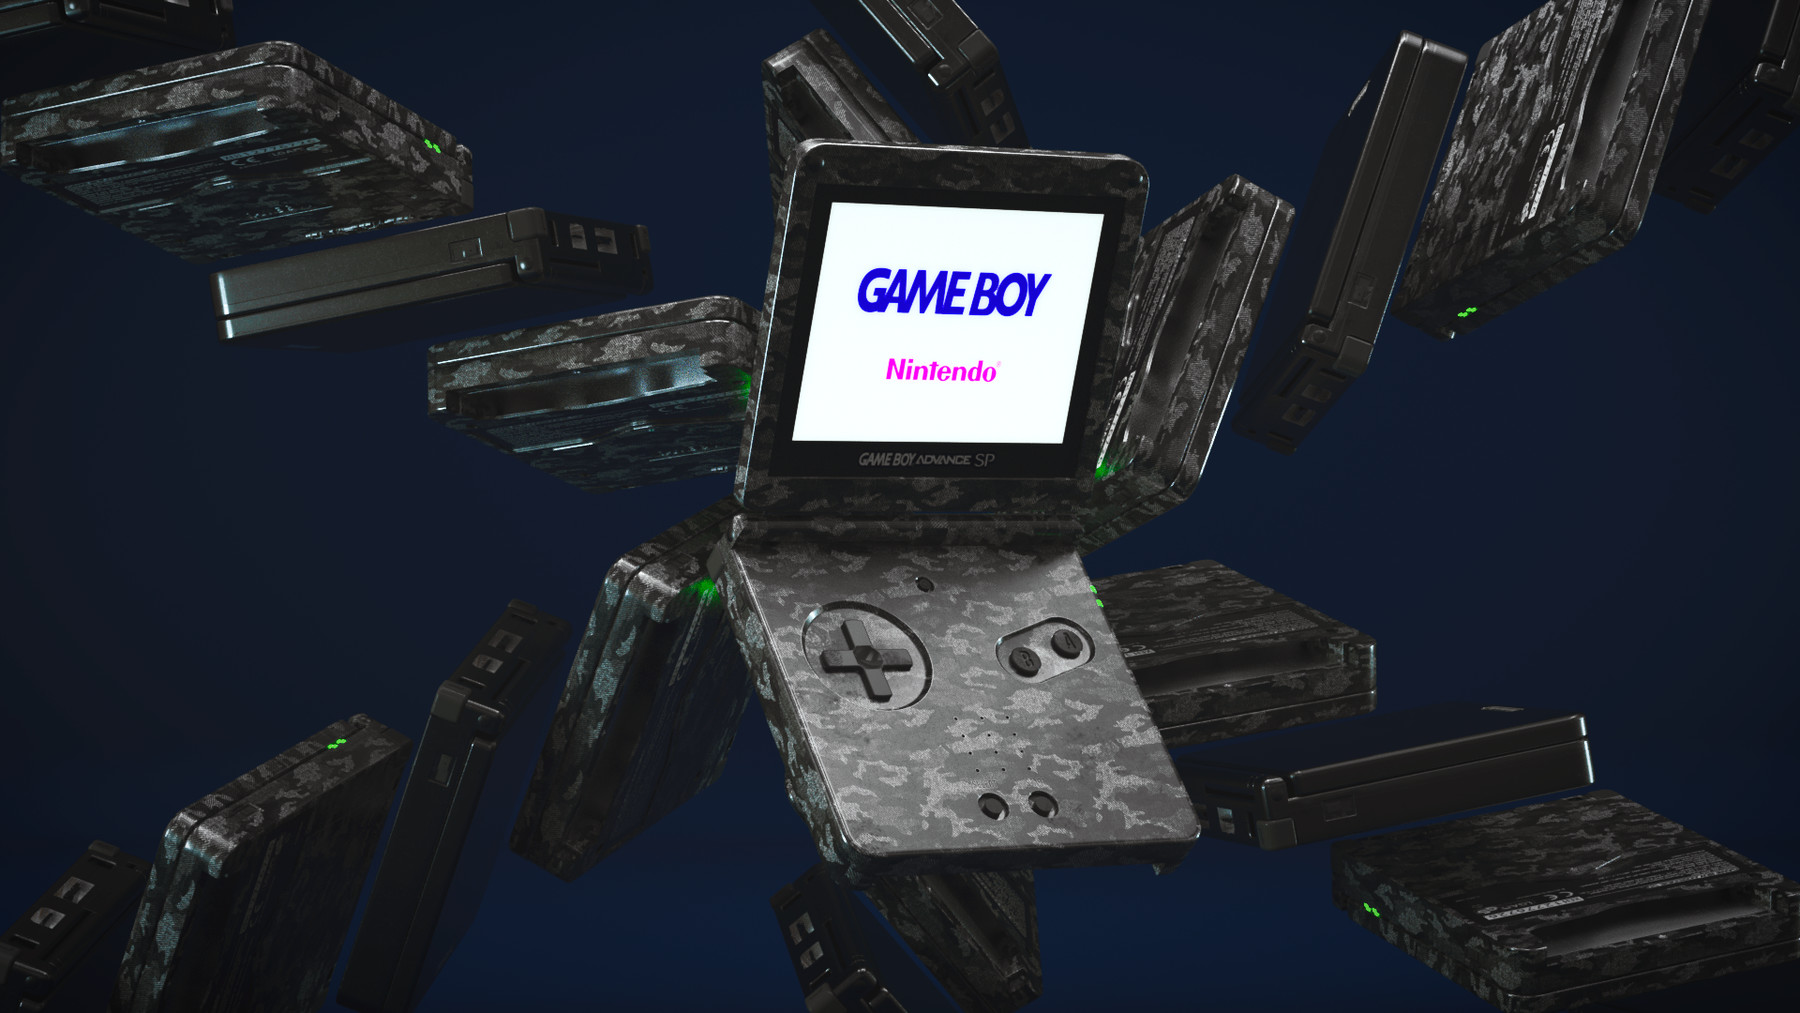 BIM Objects - Free Download! 3D Electronic Devices - Gameboy Advance SP -  ACCA software